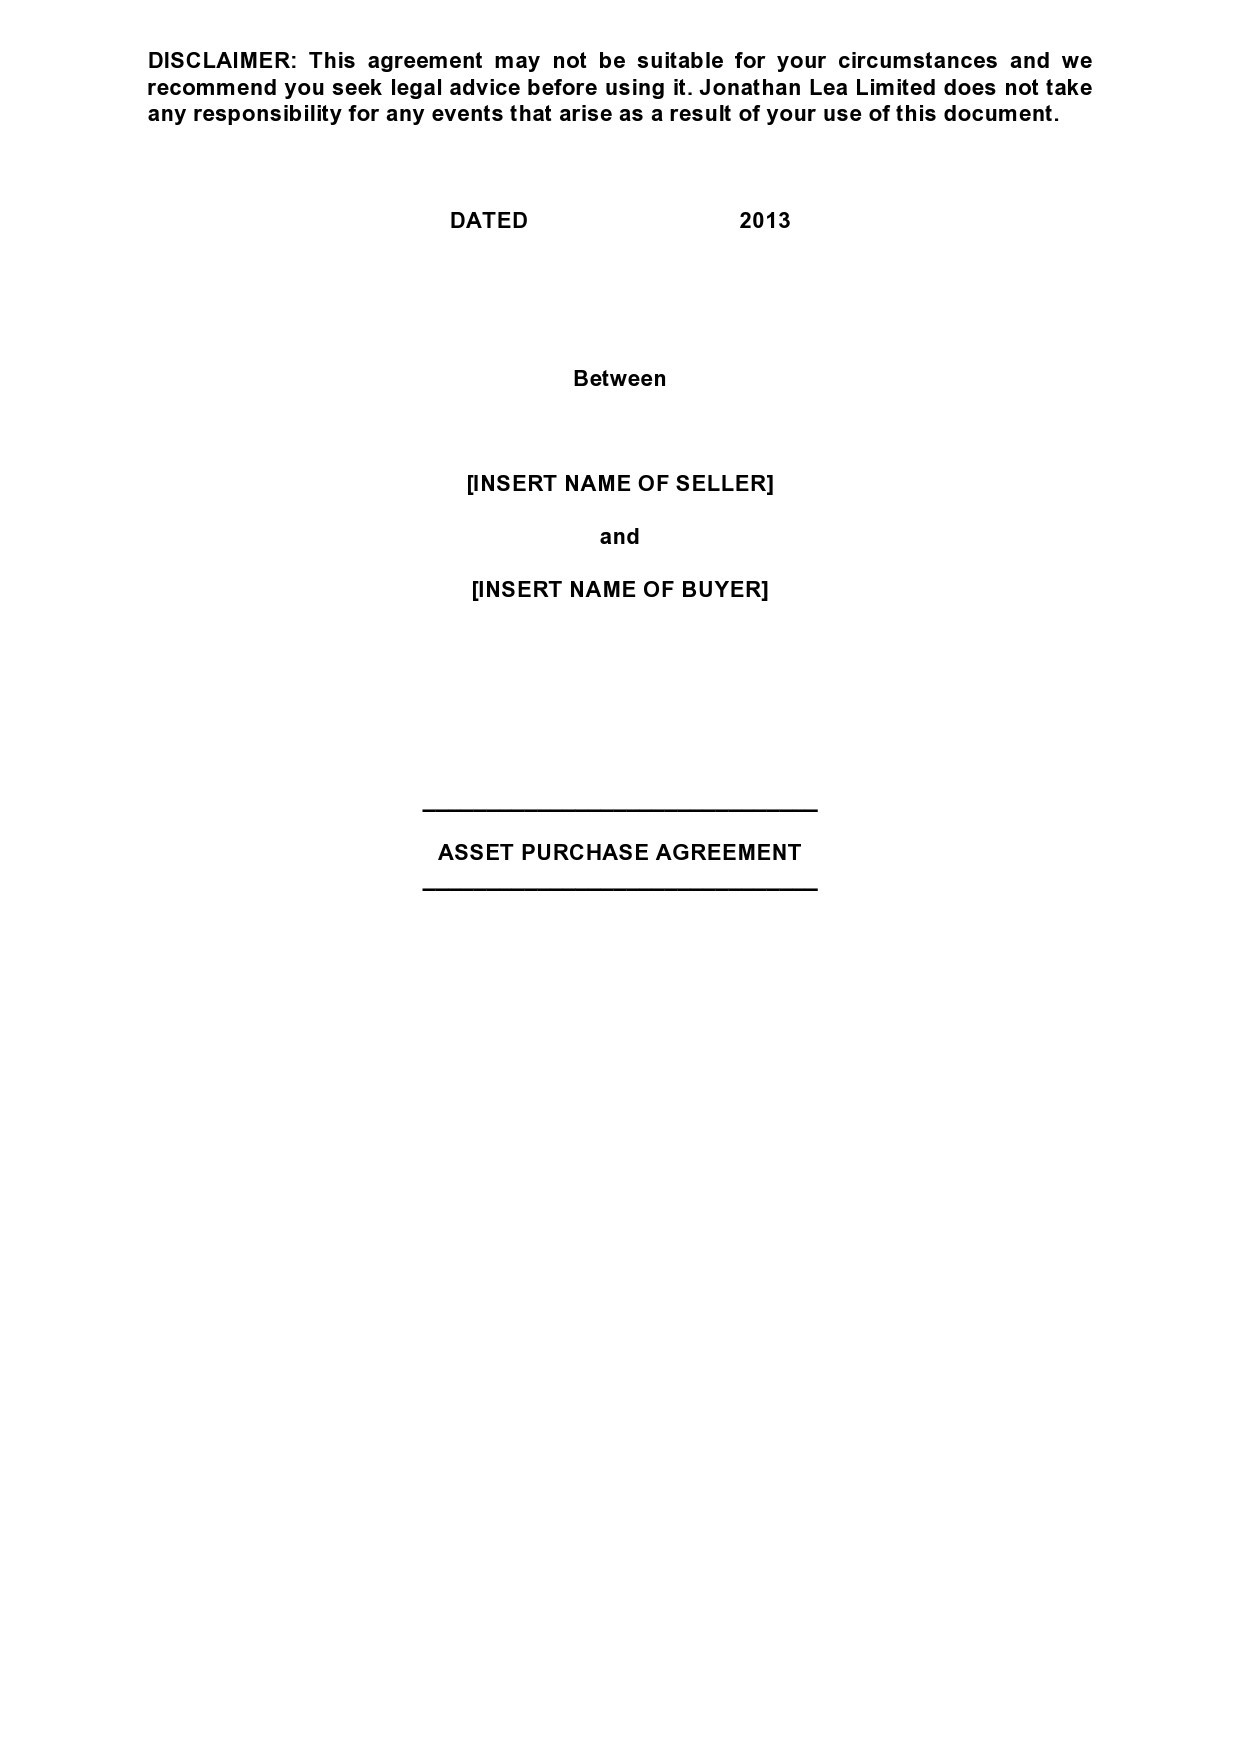 Free asset purchase agreement 06